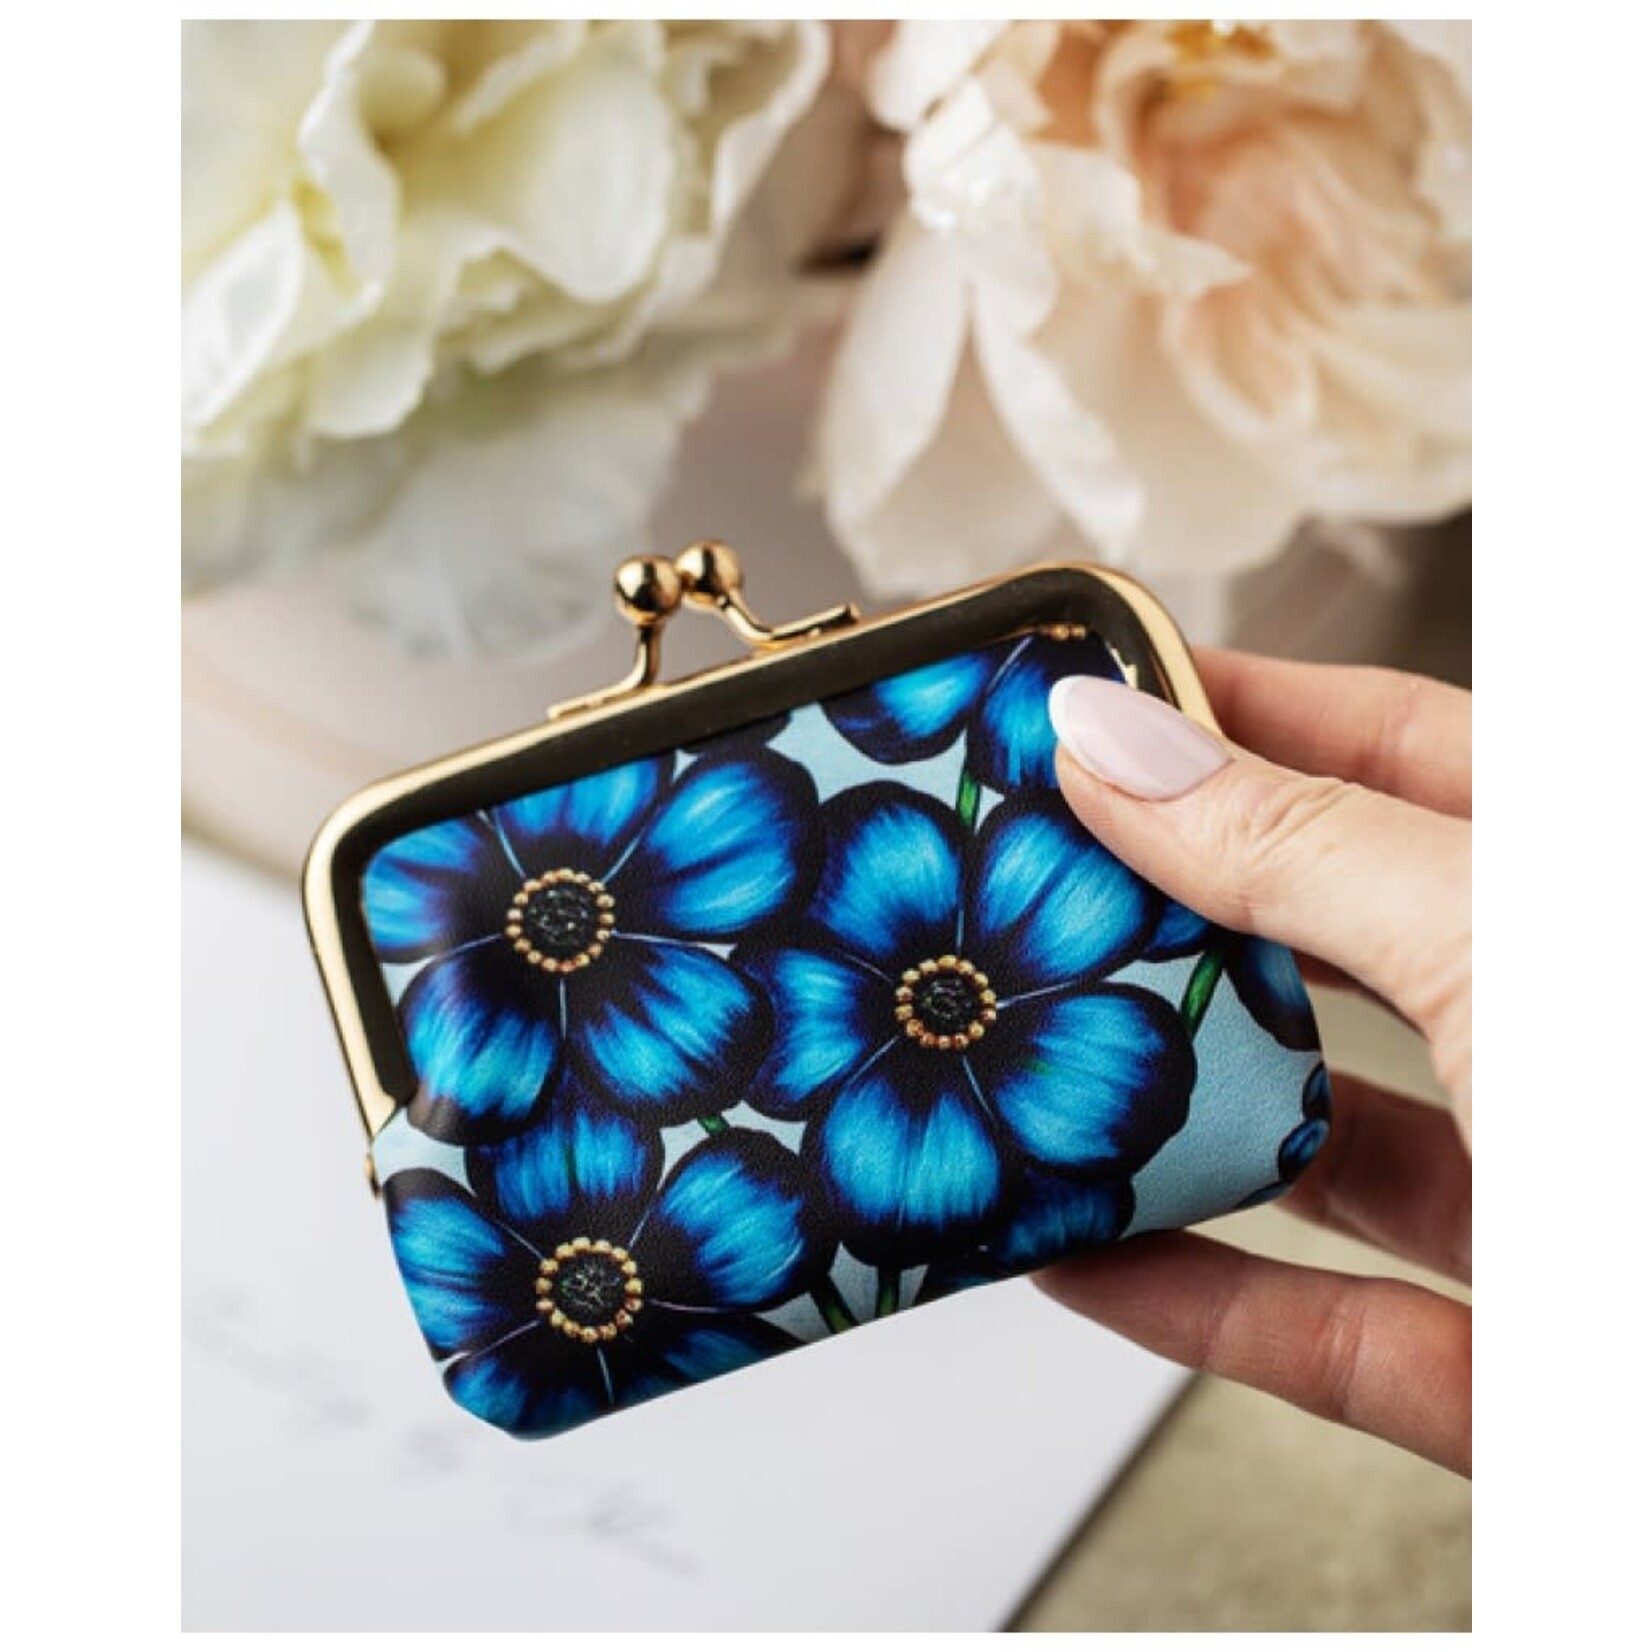 Denise Cassidy Wood Collection Coin Purse - Denise Cassidy Wood Collection